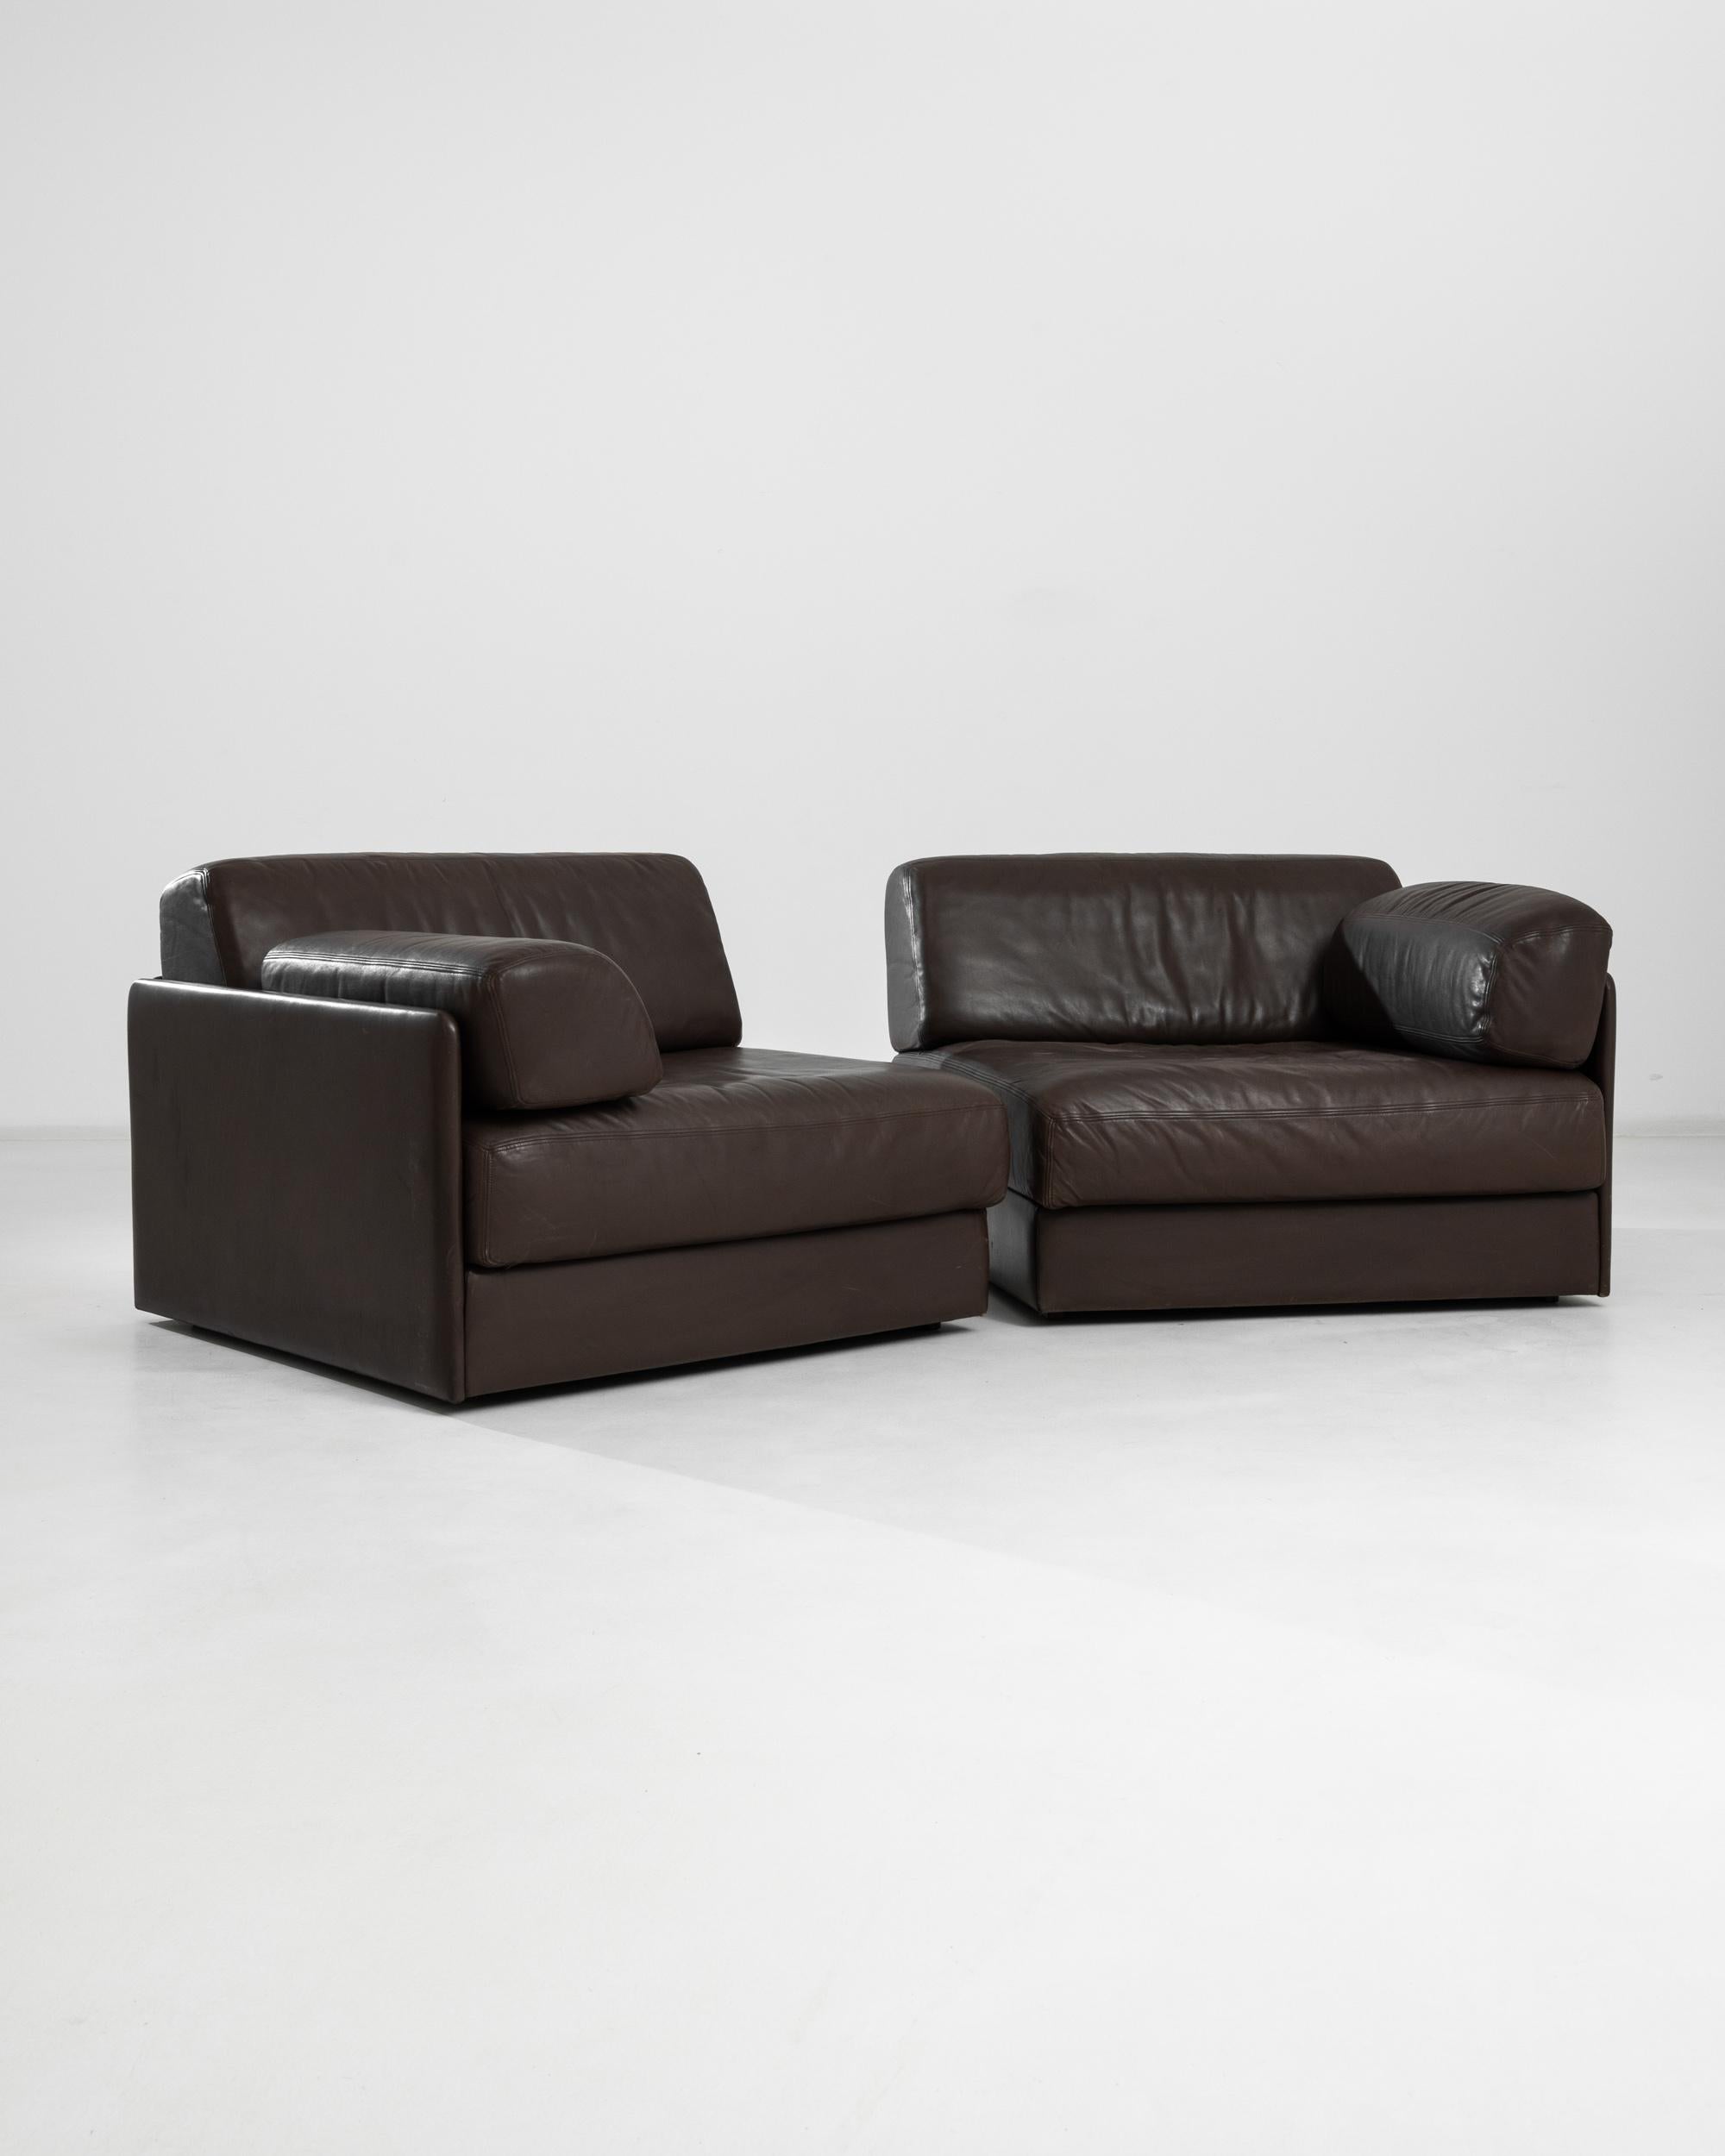 A vintage upholstered leather modular sofa made circa 1970 by the renown company De Sede, a Swiss manufacturer of exclusive furniture. A stunning symmetric two-piece sofa in a lush dark chocolate tone, allowing for versatility and playful changes of